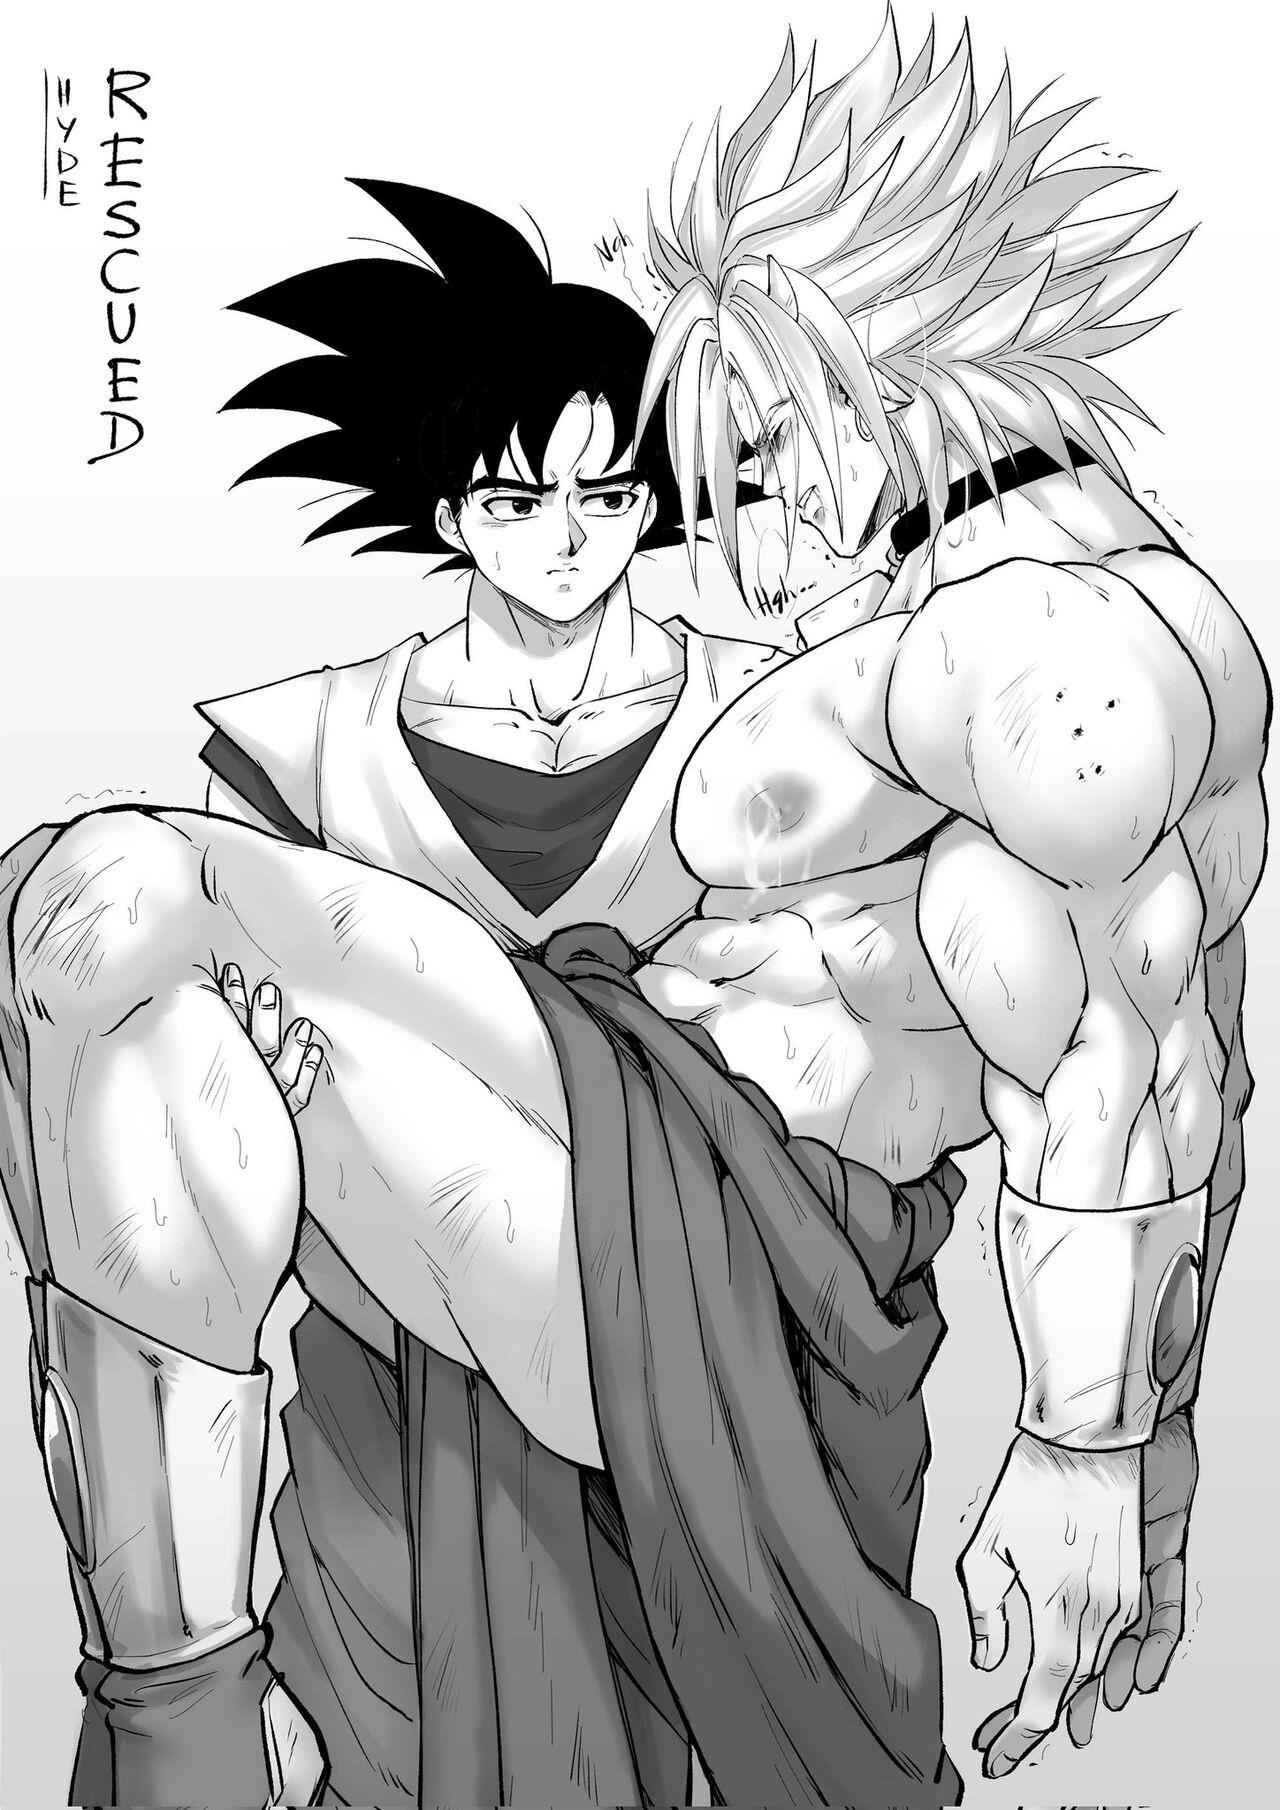 Cow broly 14